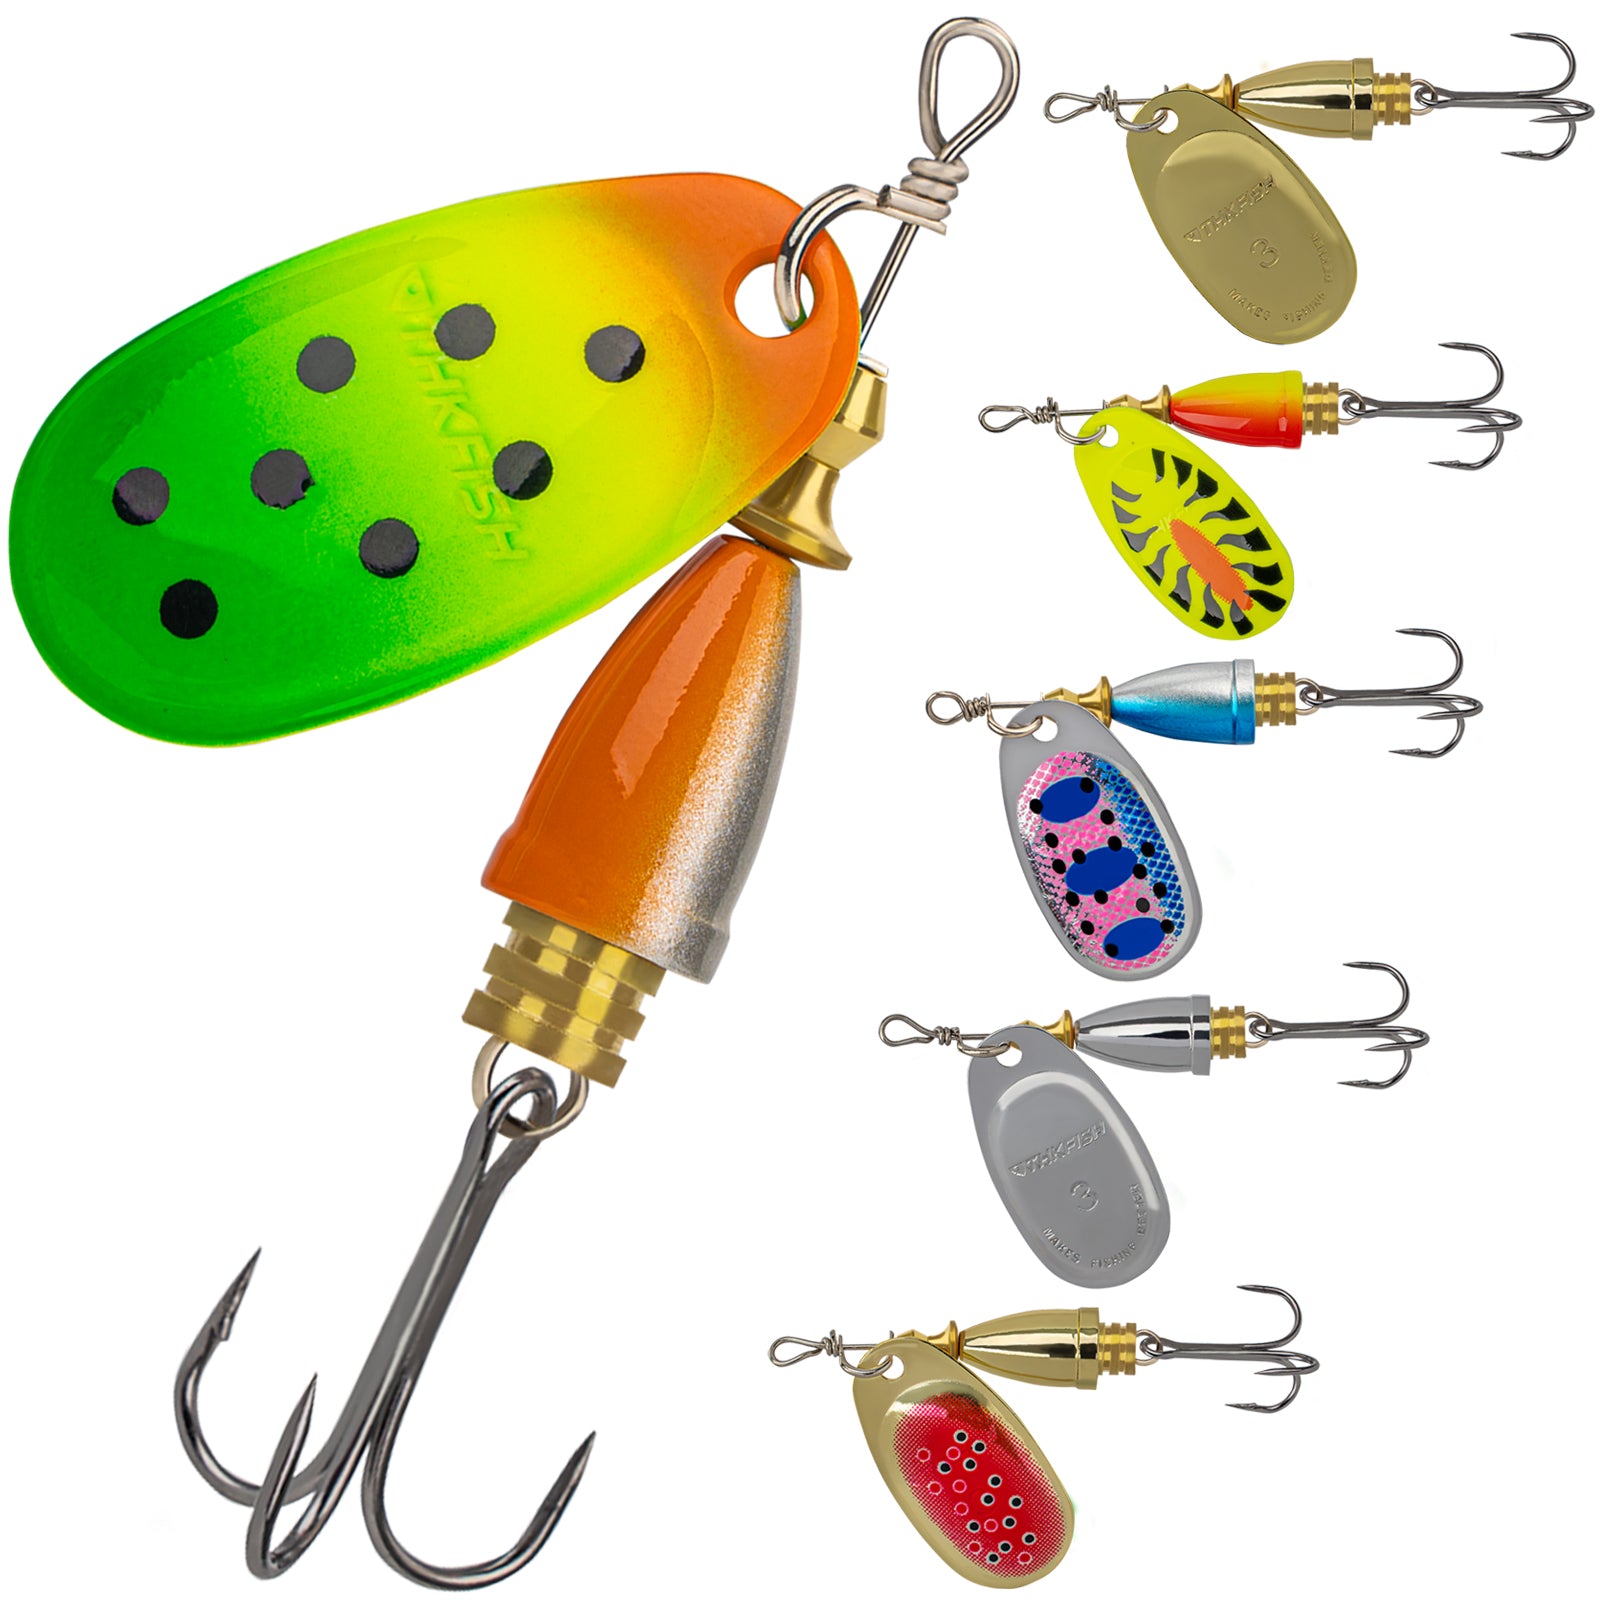 THKFISH Fishing Lures Trout Lures Fishing Spoons Lures for Trout